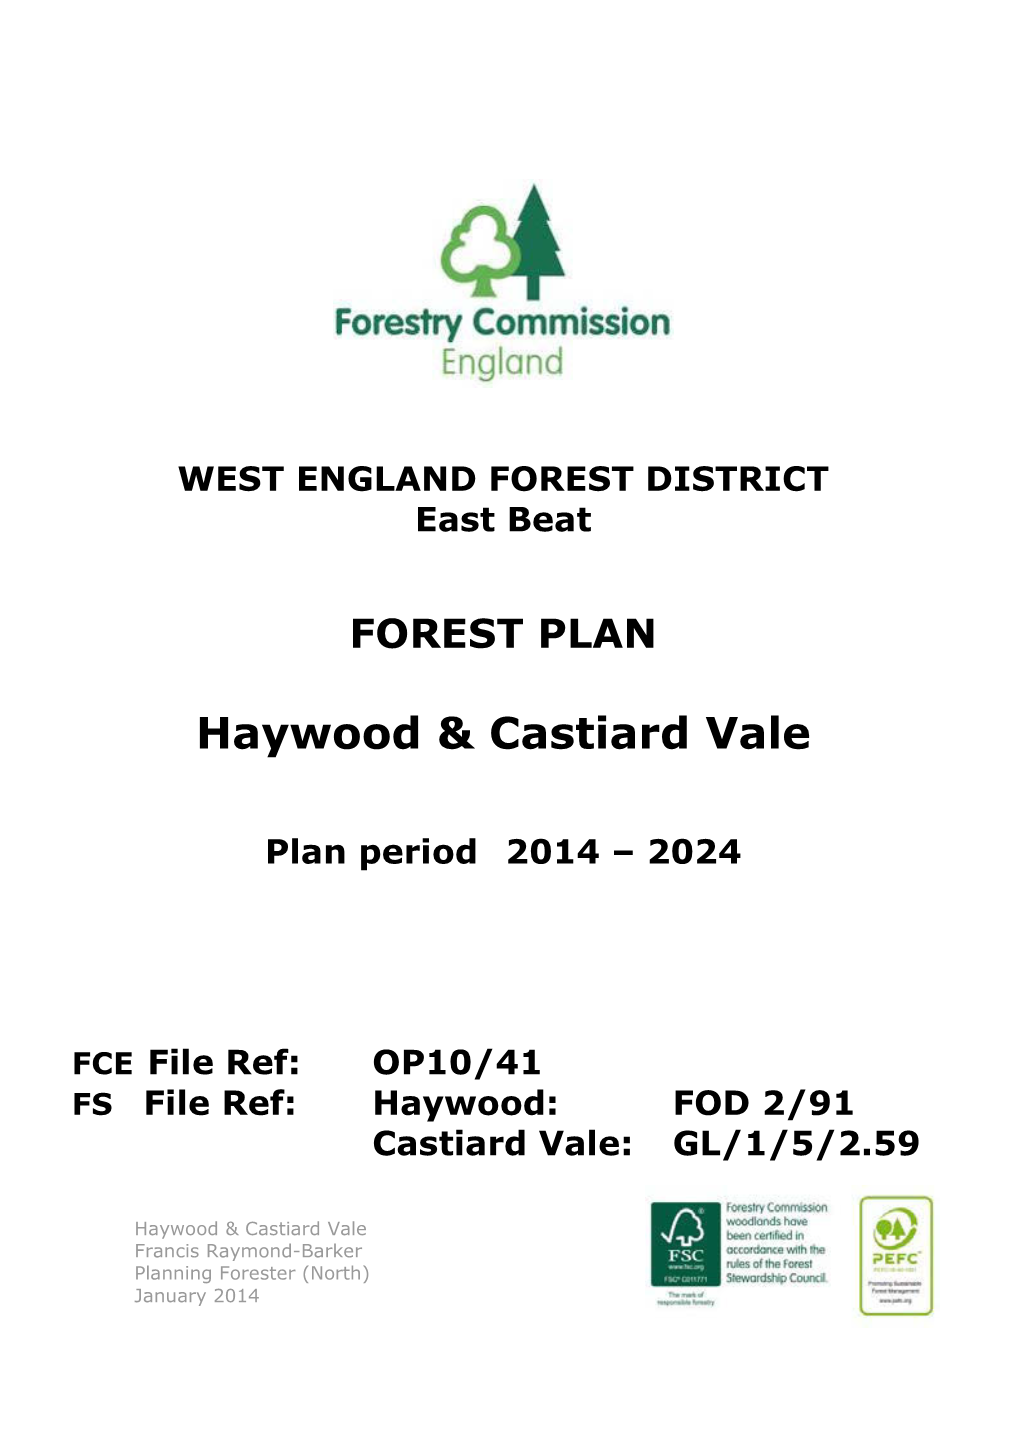 Haywood and Castiard Vale Forest Plan 2014-2024